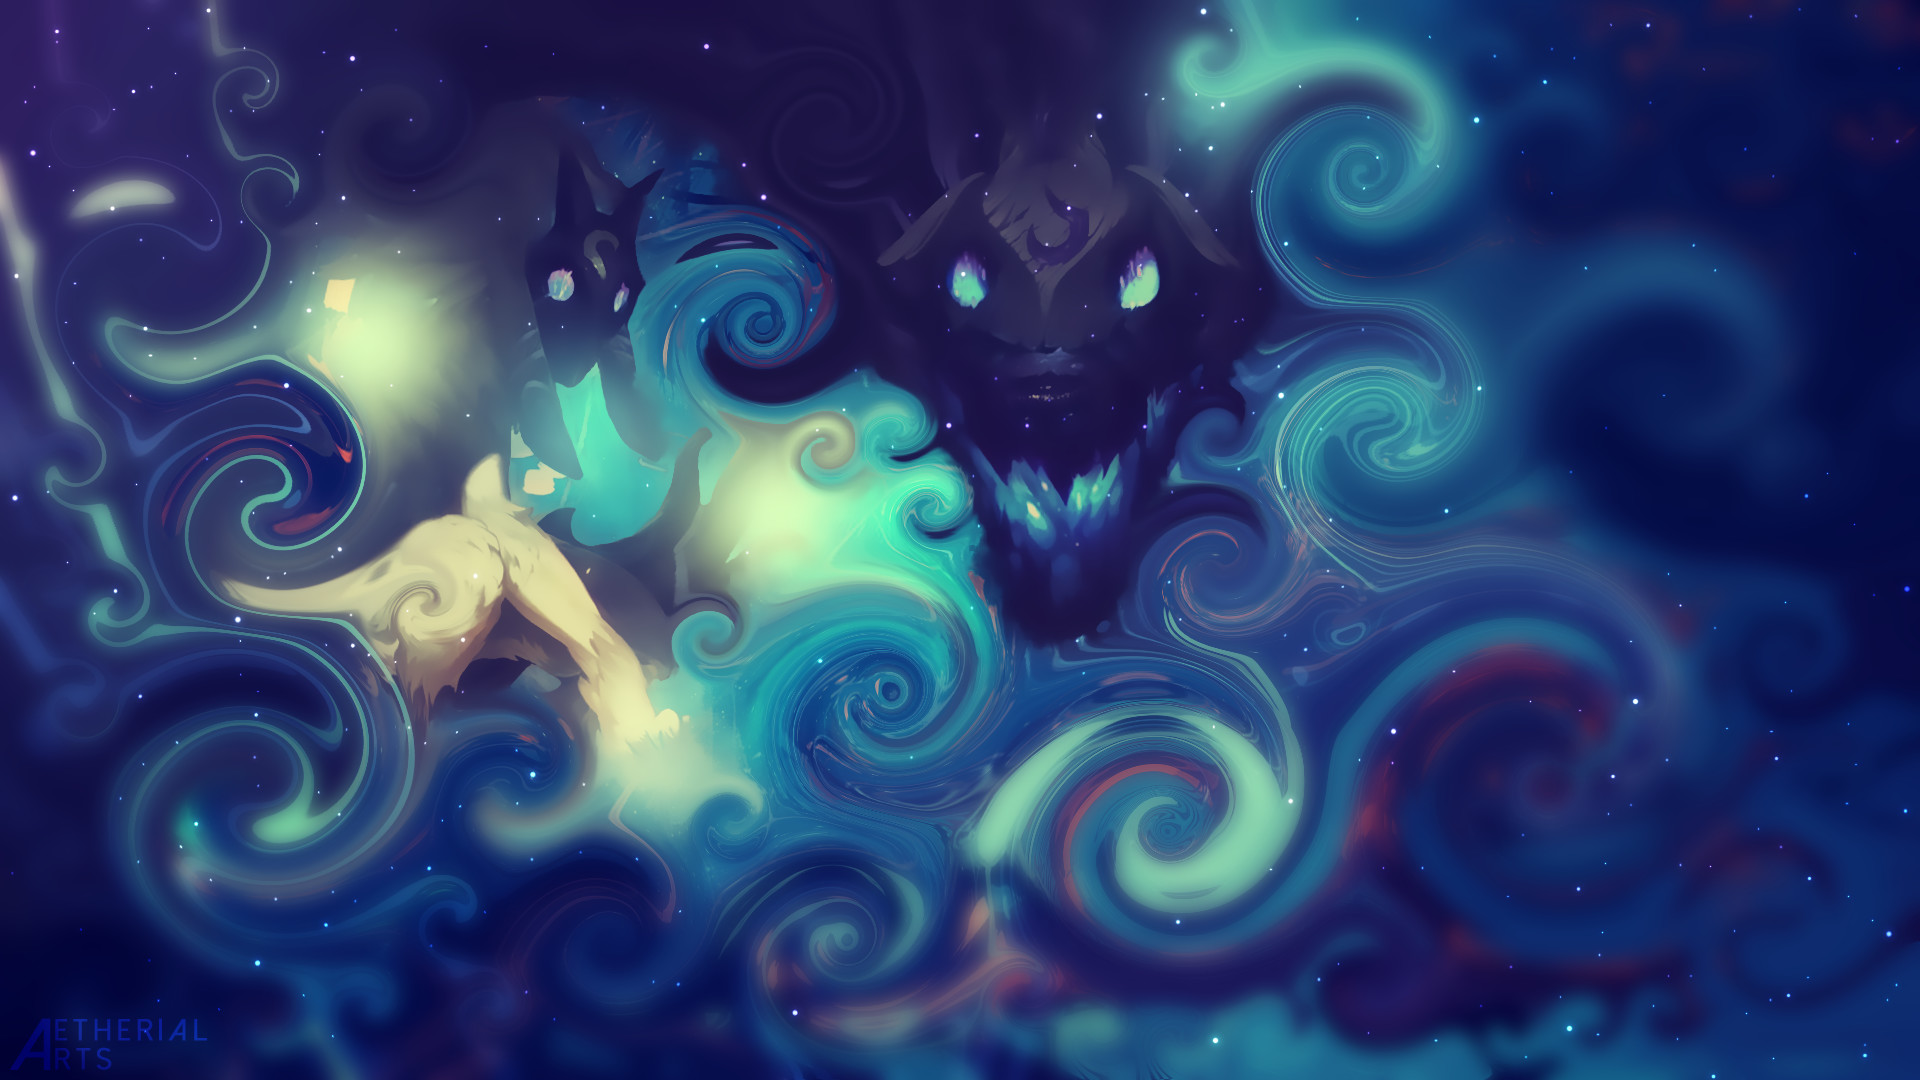 1920x1080 Kindred Swirly Wallpaper by AetherialArts Kindred Swirly Wallpaper by  AetherialArts